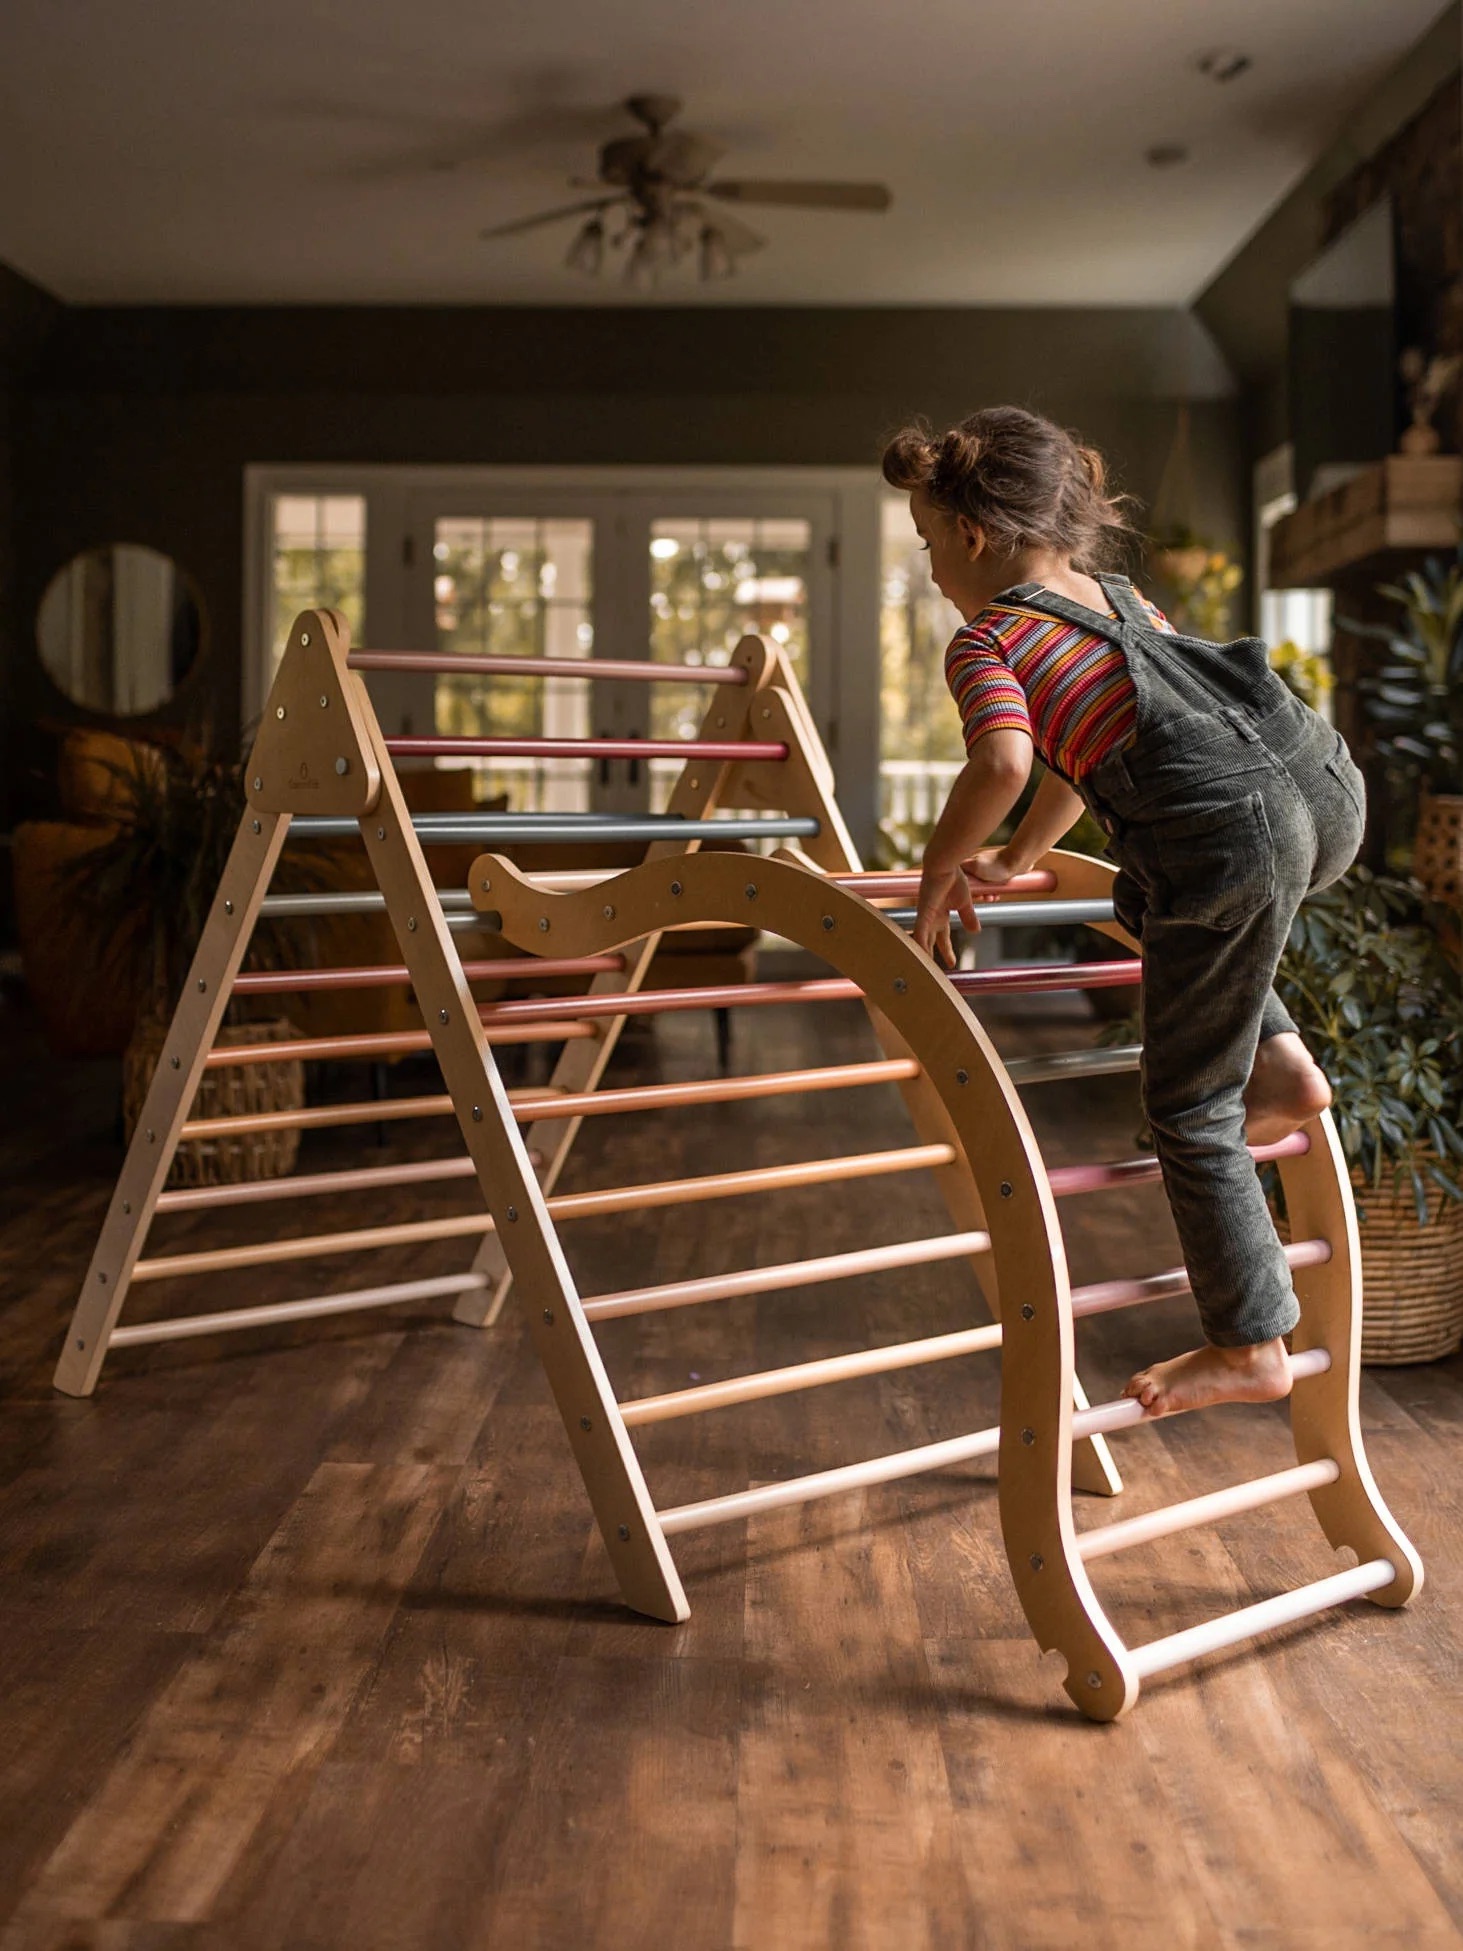 A child climbs on an indoor wooden play structure with a climbing ladder, in a well-lit room with wooden floors and large windows in the background.